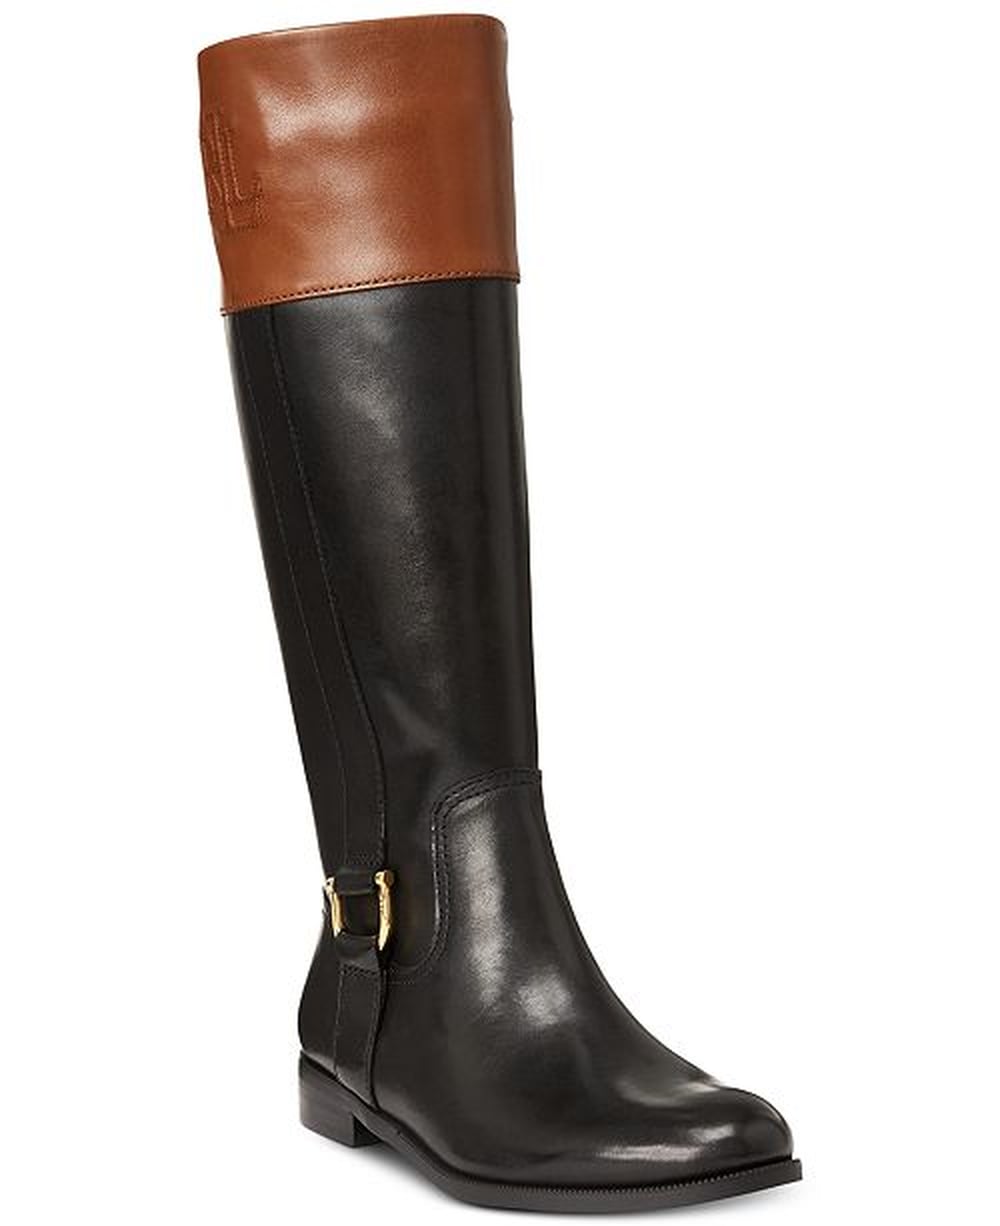 These Are the Best Knee-High Boots at Macy's | POPSUGAR Fashion